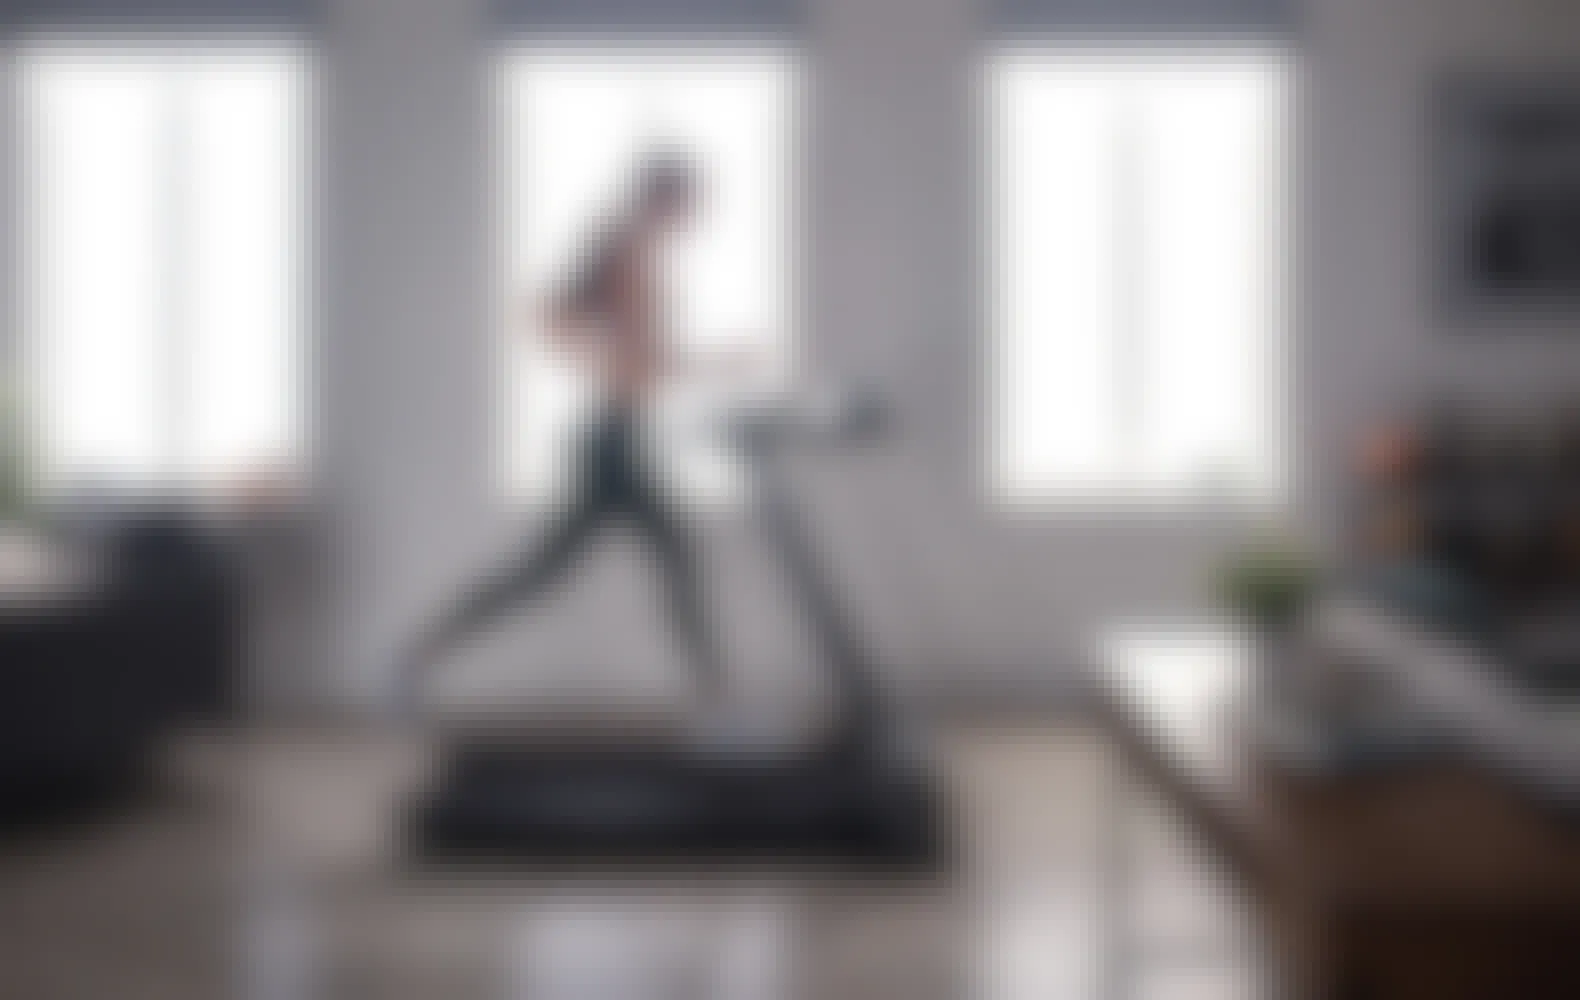 Black Friday Treadmill Deals Can Save You Up to 69% — Jump Start Your New Year's Goals